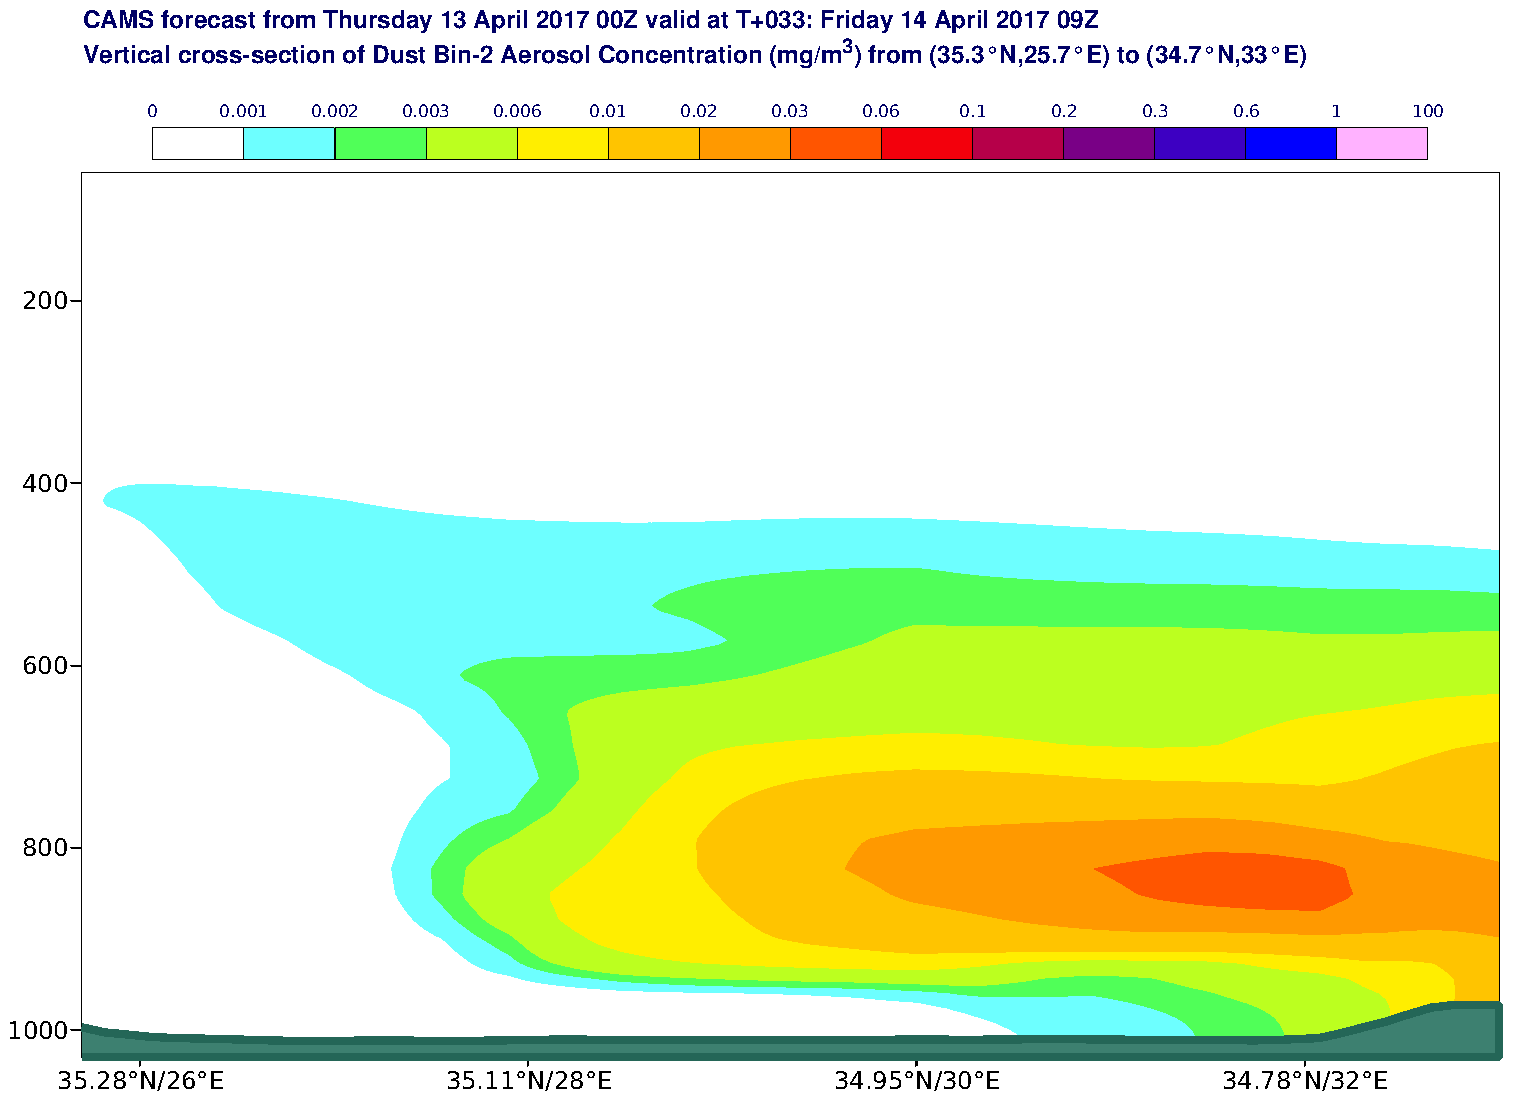 Vertical cross-section of Dust Bin-2 Aerosol Concentration (mg/m3) valid at T33 - 2017-04-14 09:00